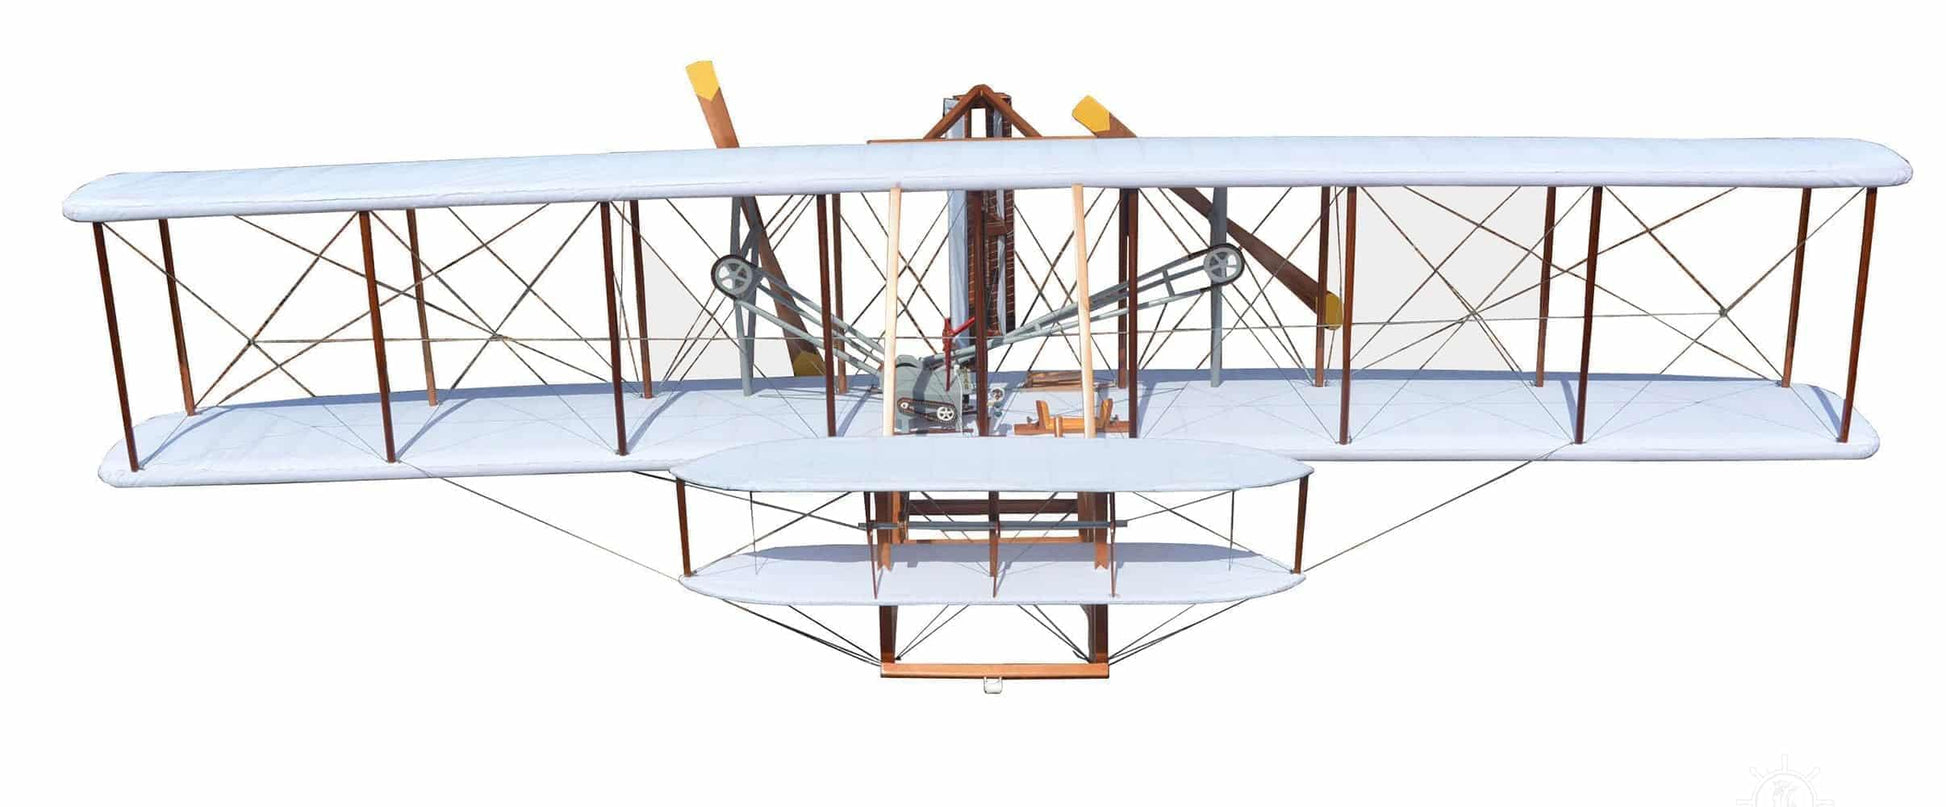 ALDO Creative Arts Collectibles Scale Model L: 48 W: 96 H: 24 Inches / NEW / Wood and Fabric Airplane 1903 Wright Brother Flyer Deck Top Large Model Aircraft